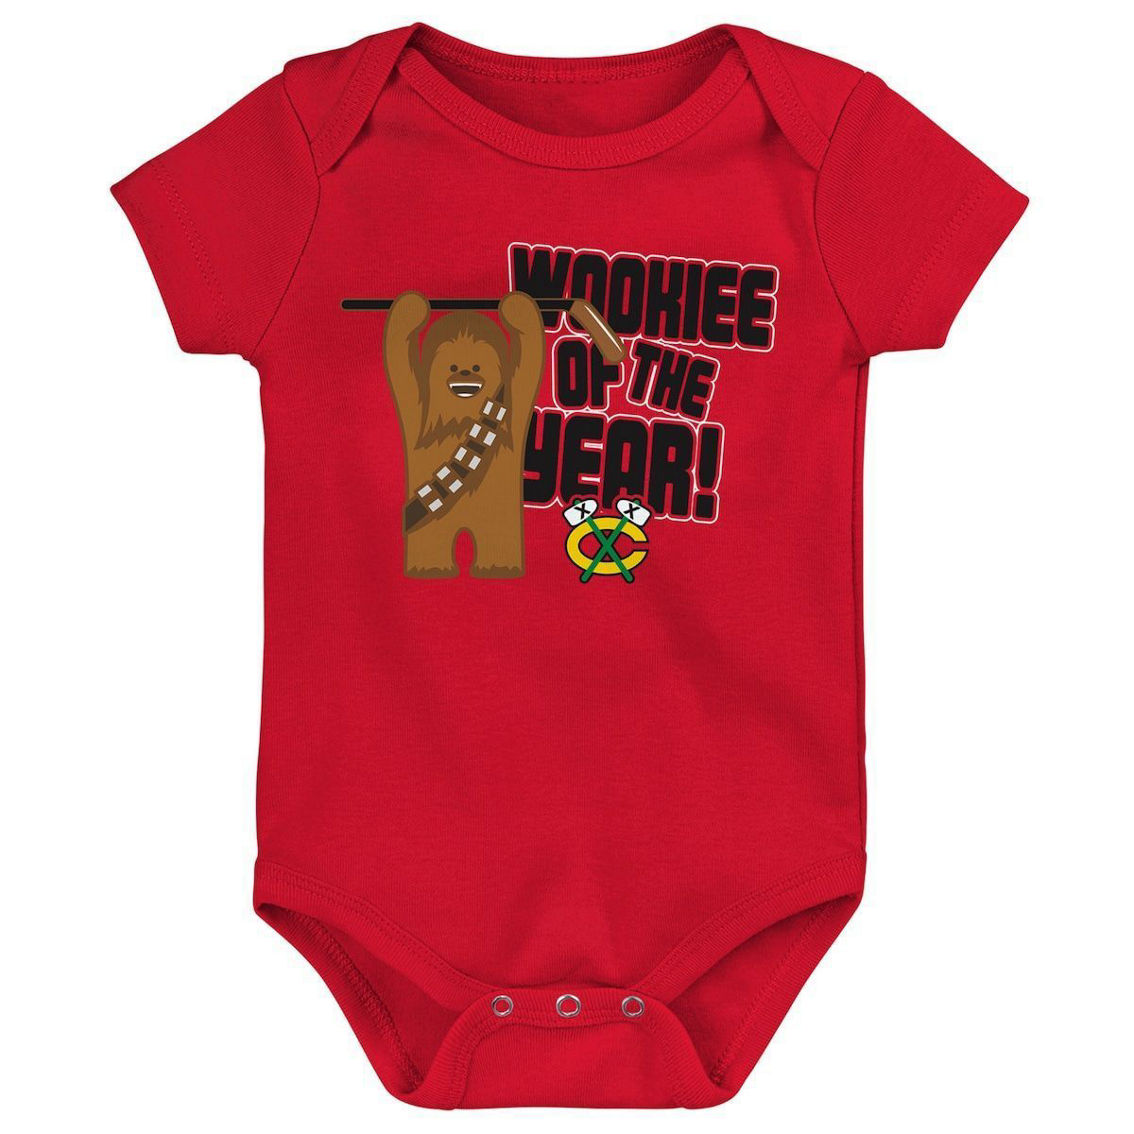 Outerstuff Infant Red Chicago Blackhawks Star Wars Wookie of the Year Bodysuit - Image 2 of 2